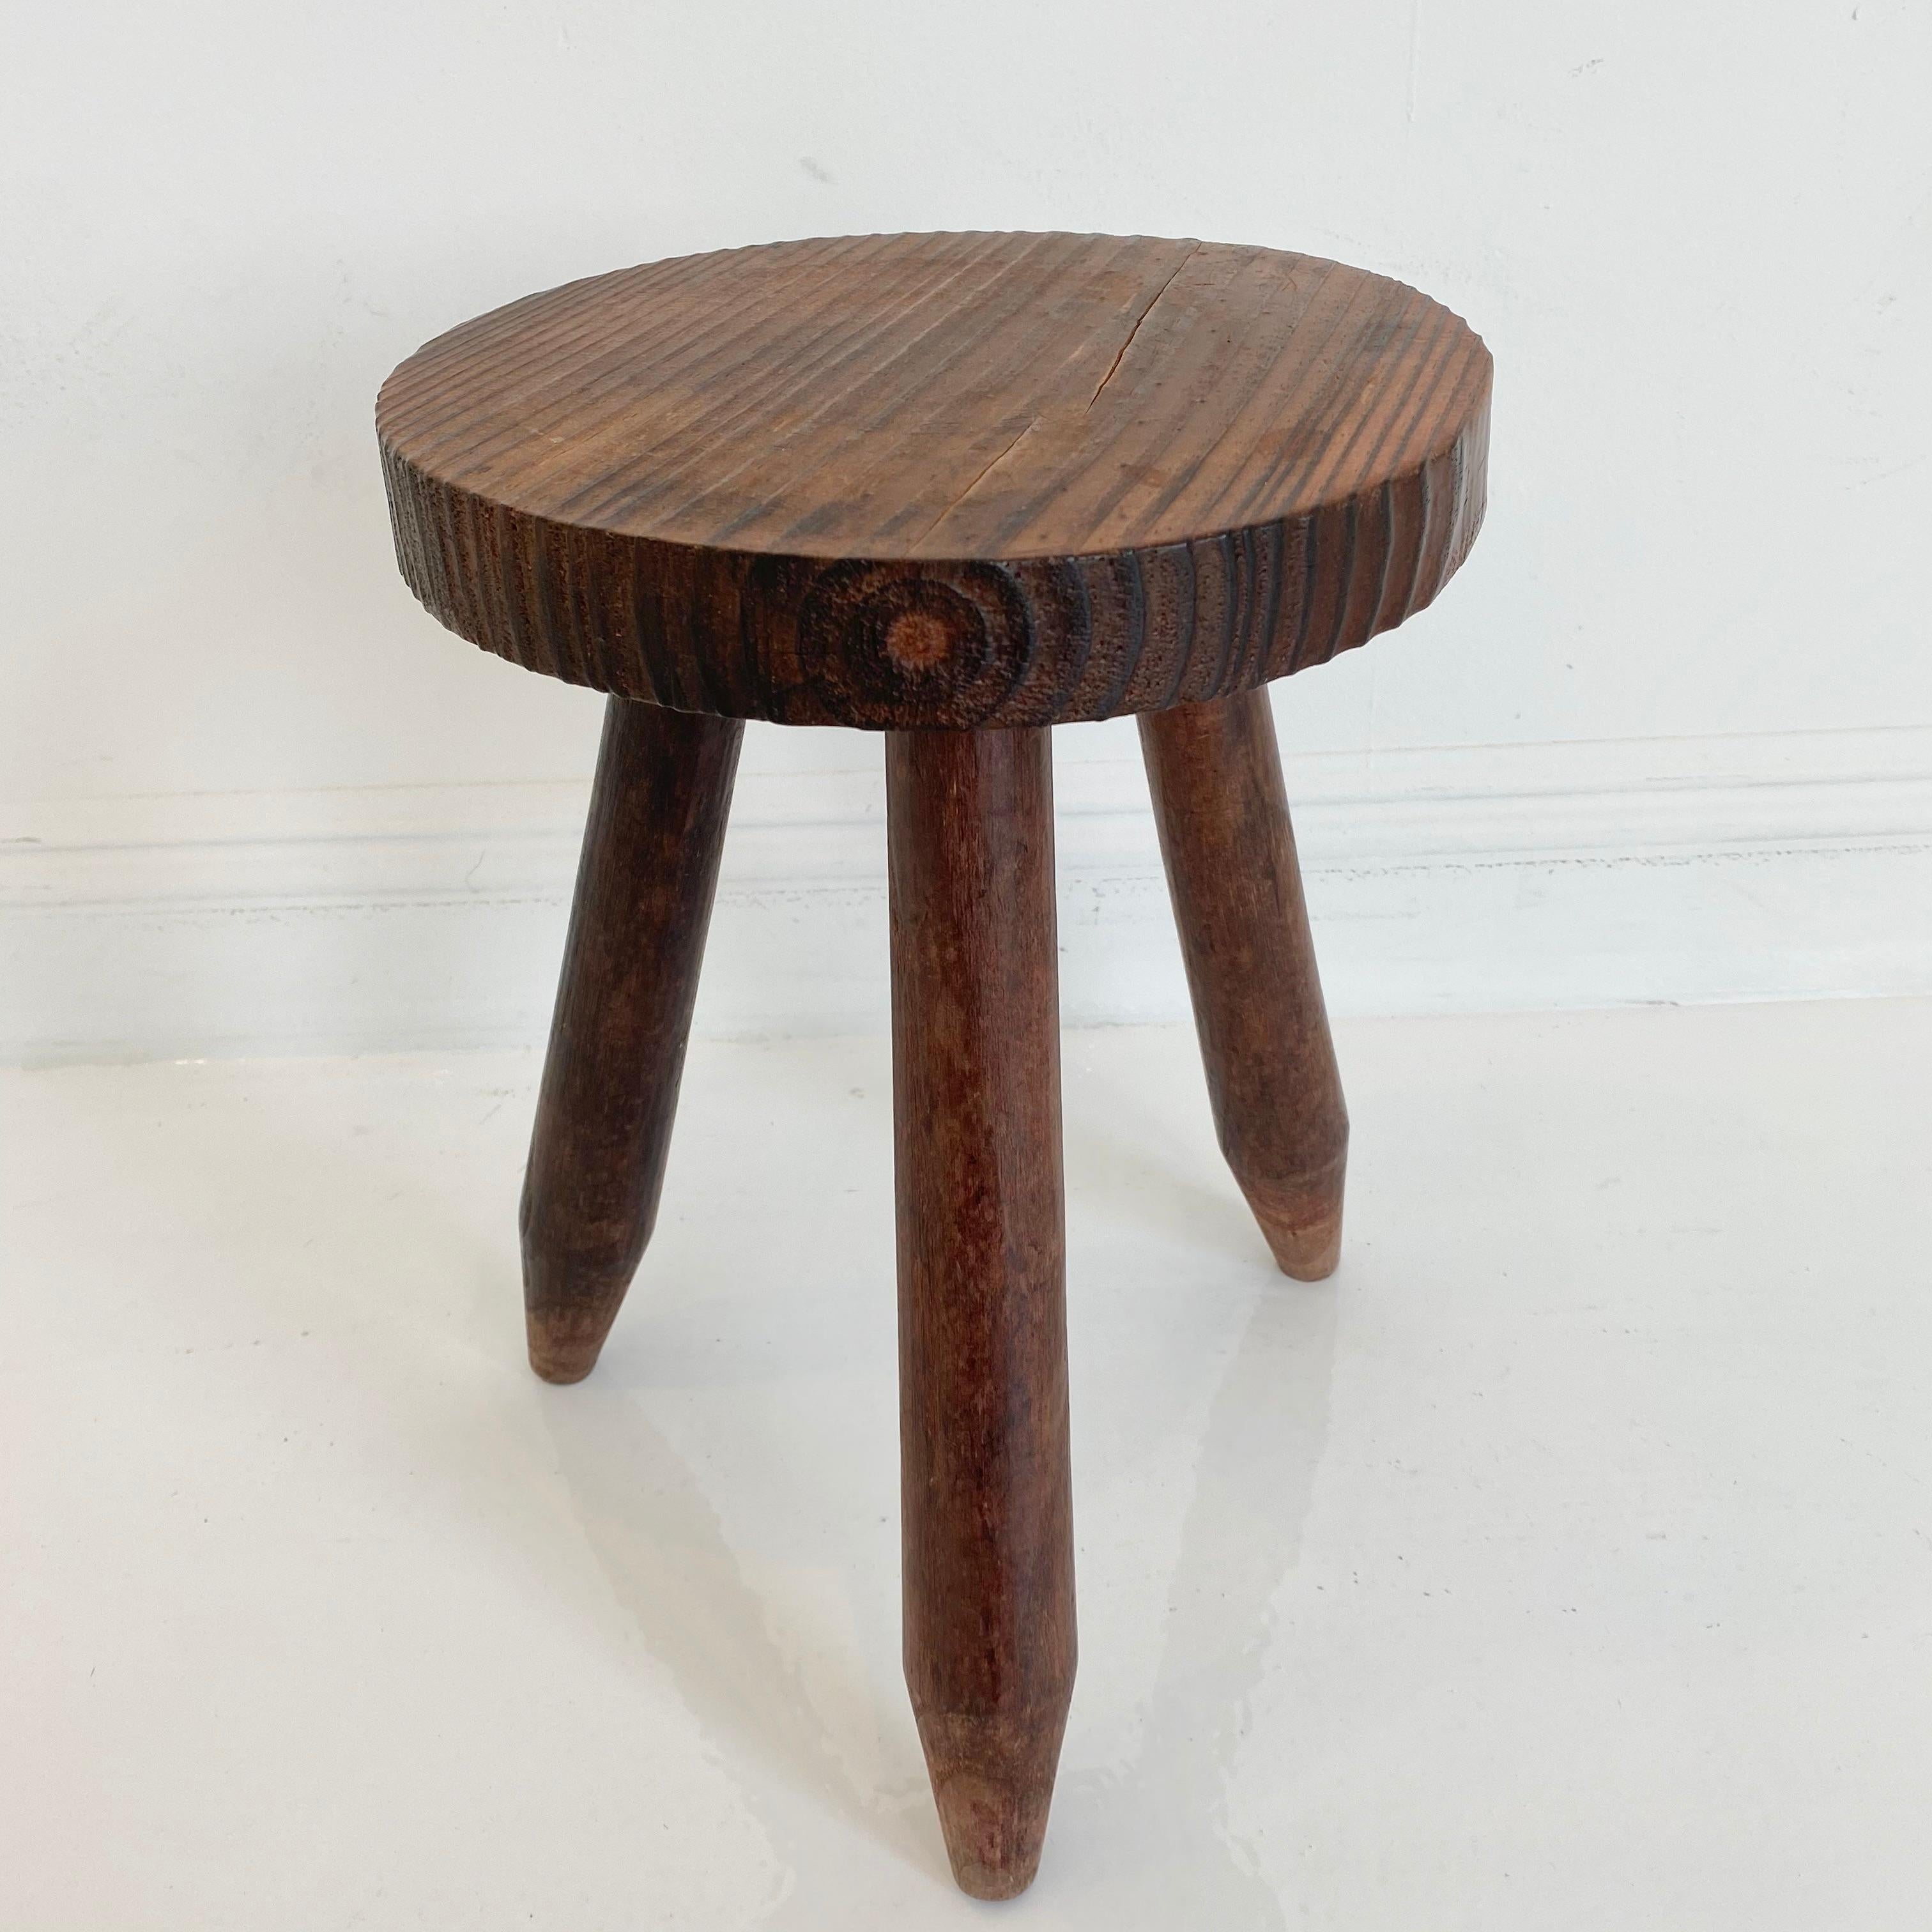 Fantastic wood stool from France in the style of Charlotte Perriand. Made in the 1960s with three legs. No hardware. Good vintage condition.
 